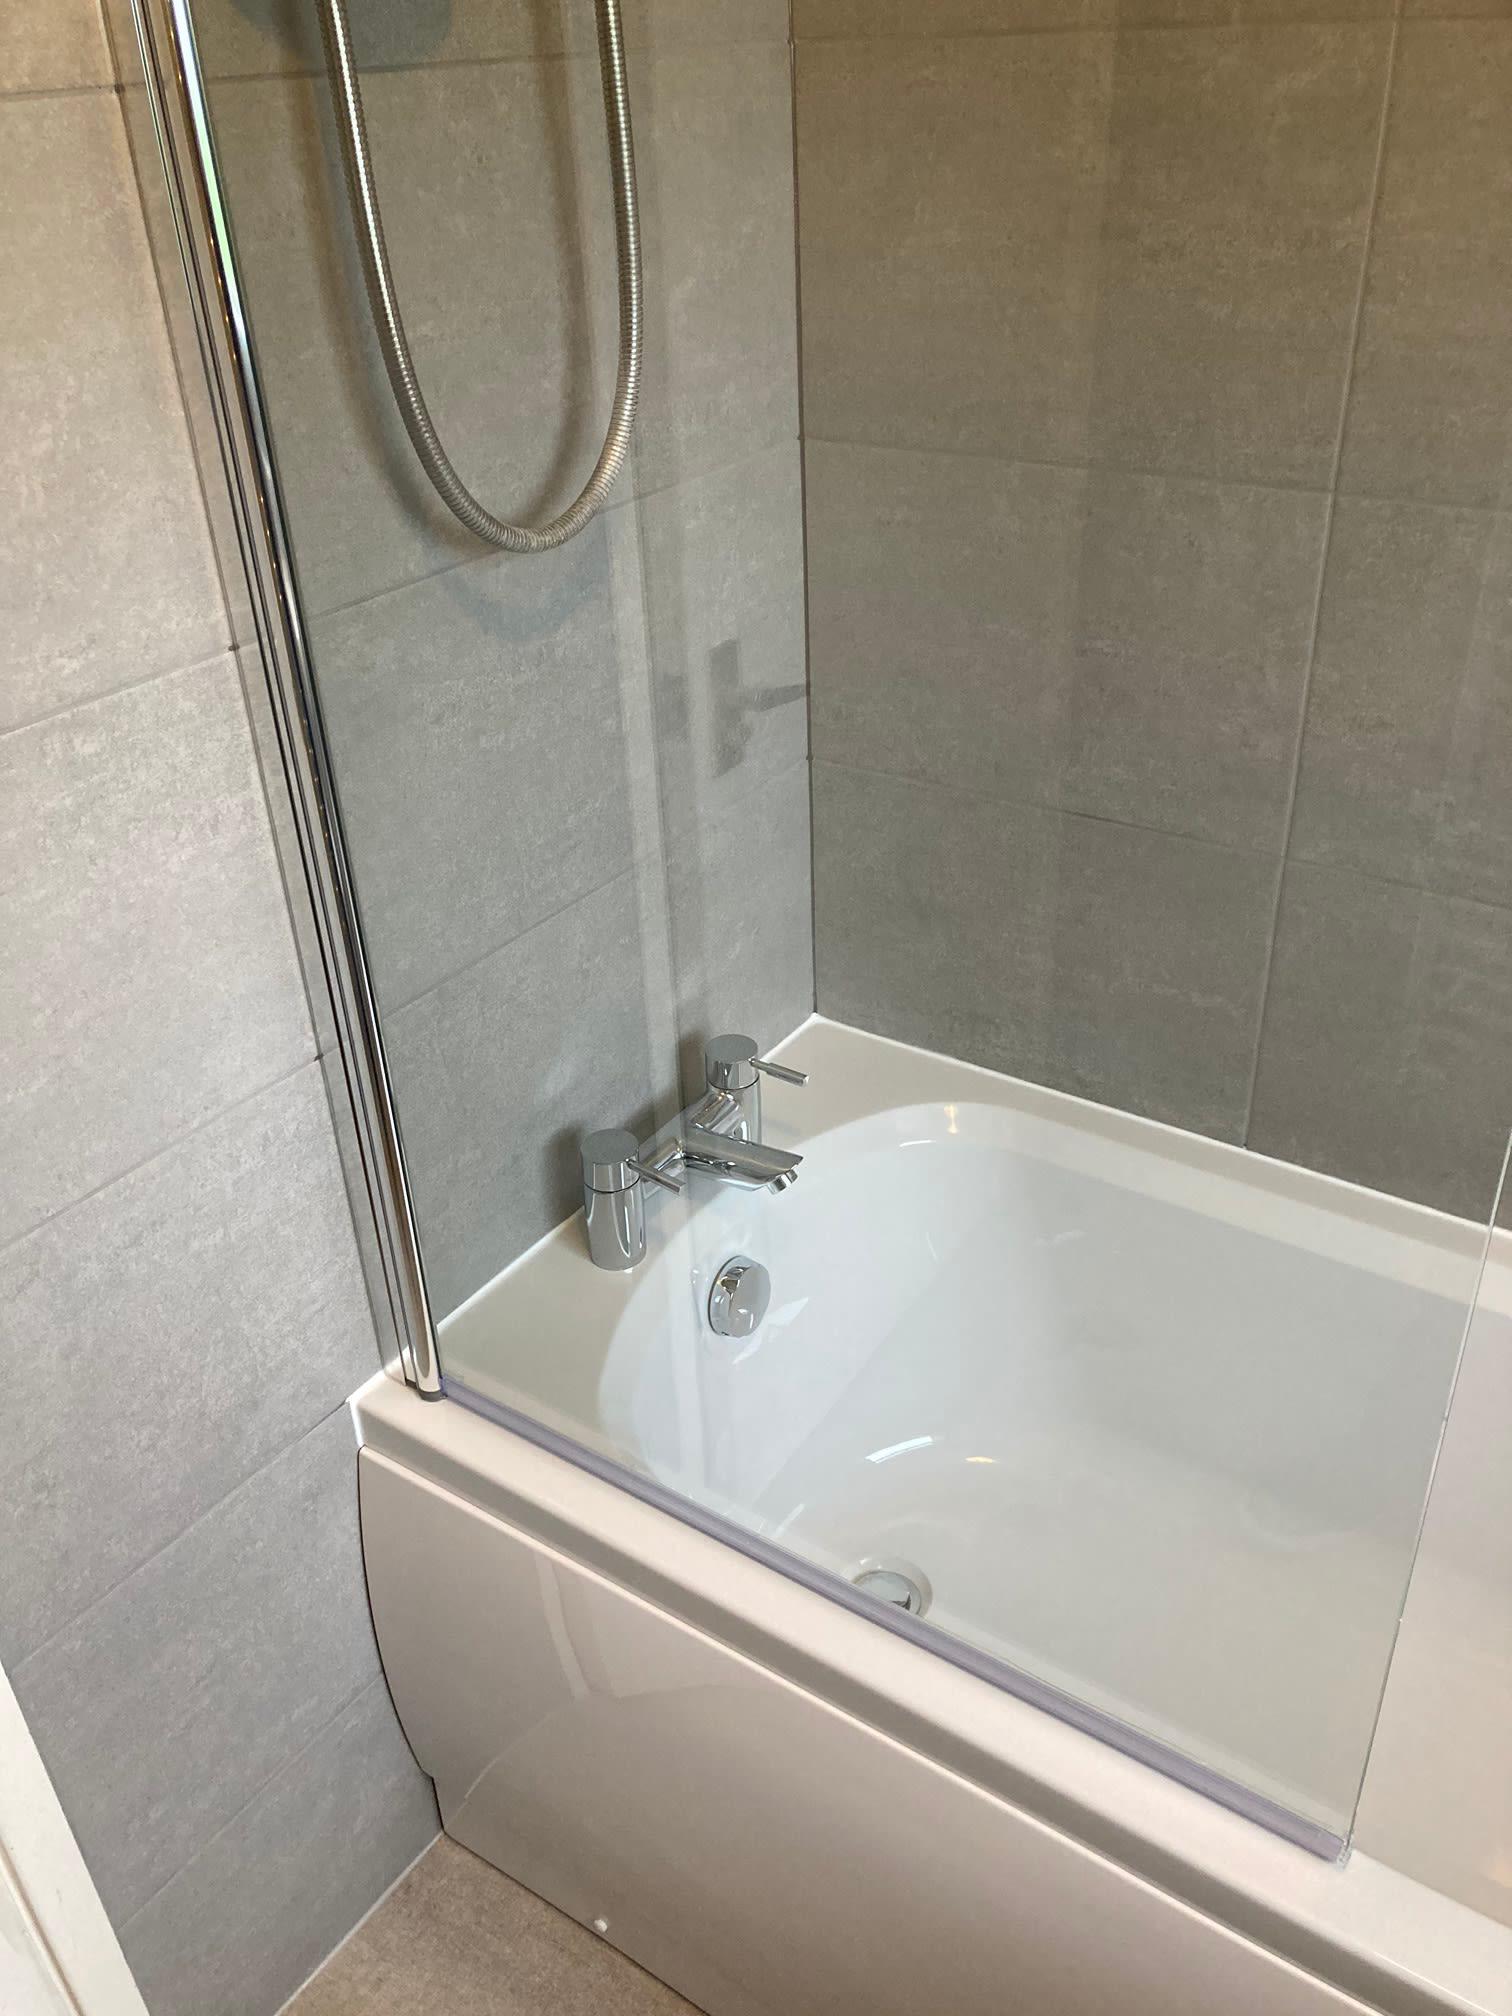 Images Blaby Plumbing